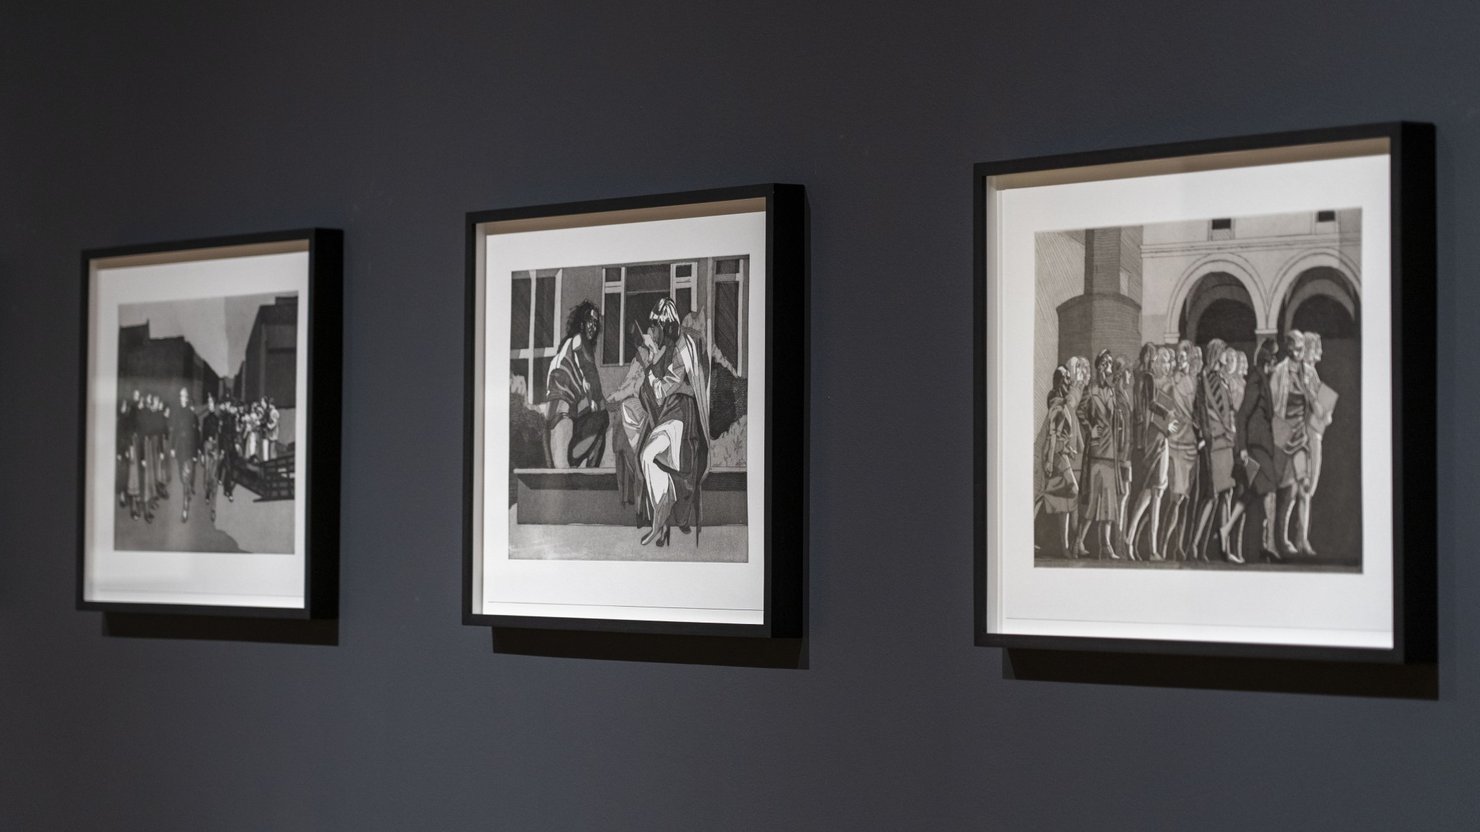 Photograph showing three black and white etchings by Quinlan and Hastings hanging in a gallery